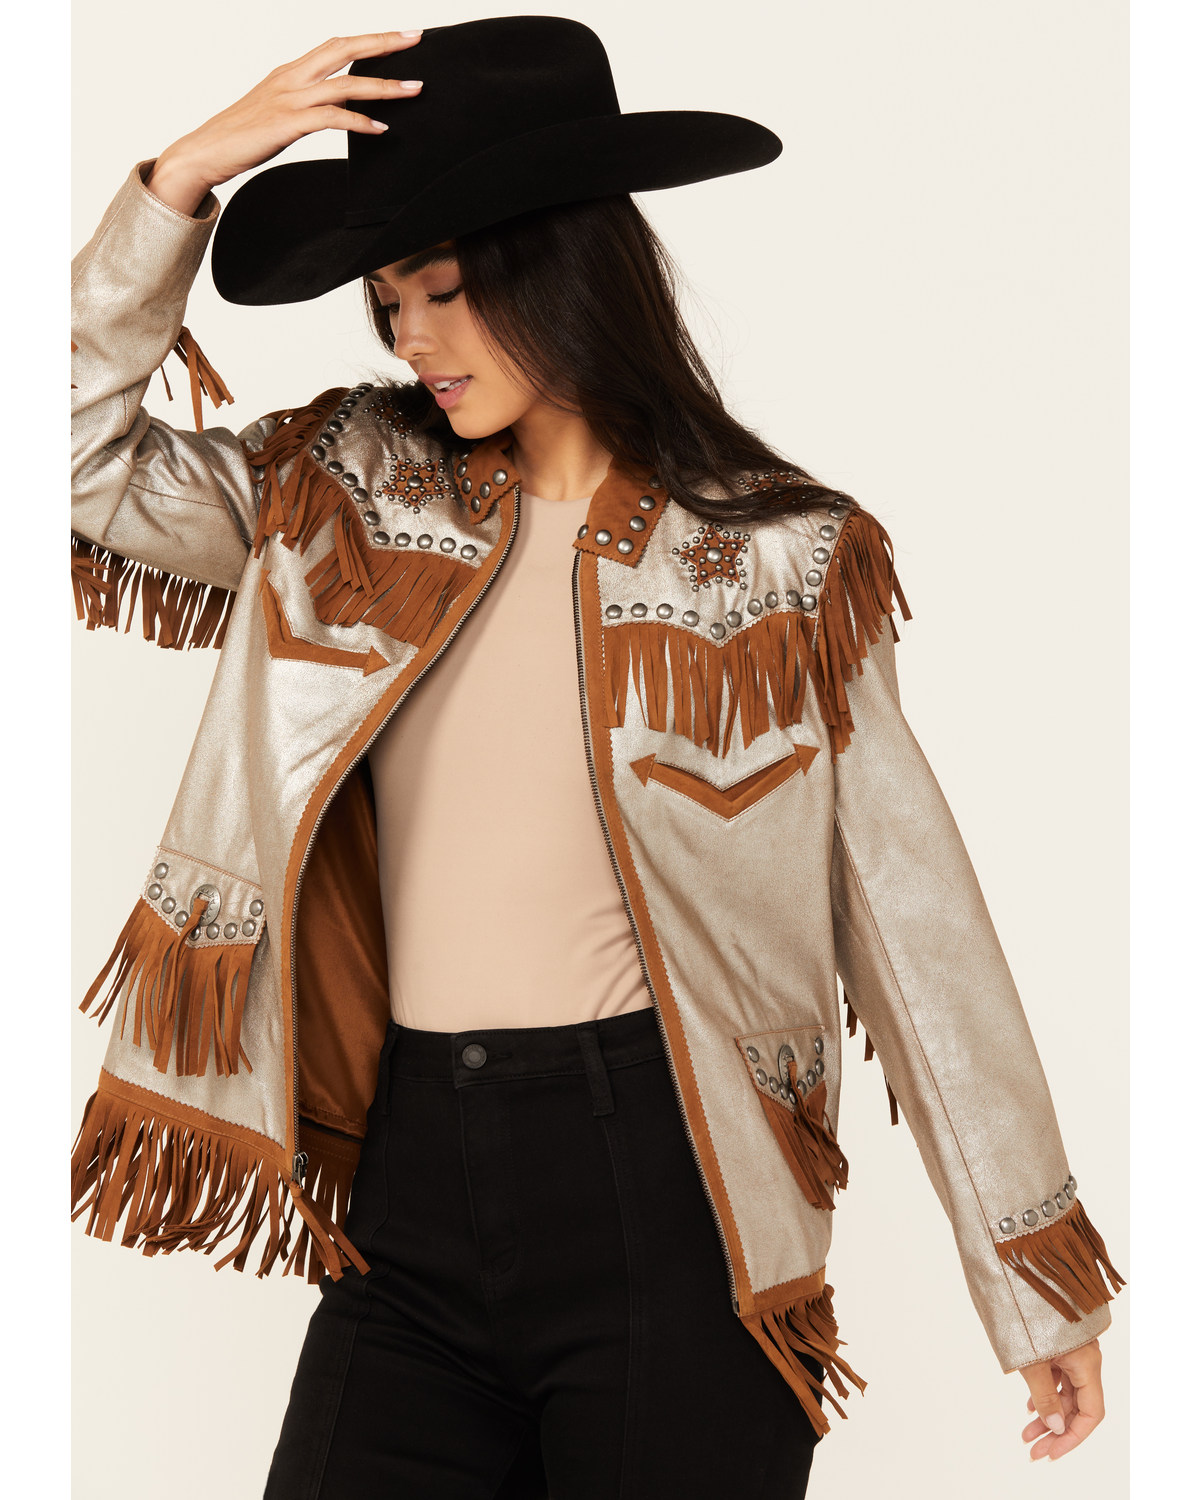 Double D Ranch Women's Silver Ryder Jacket